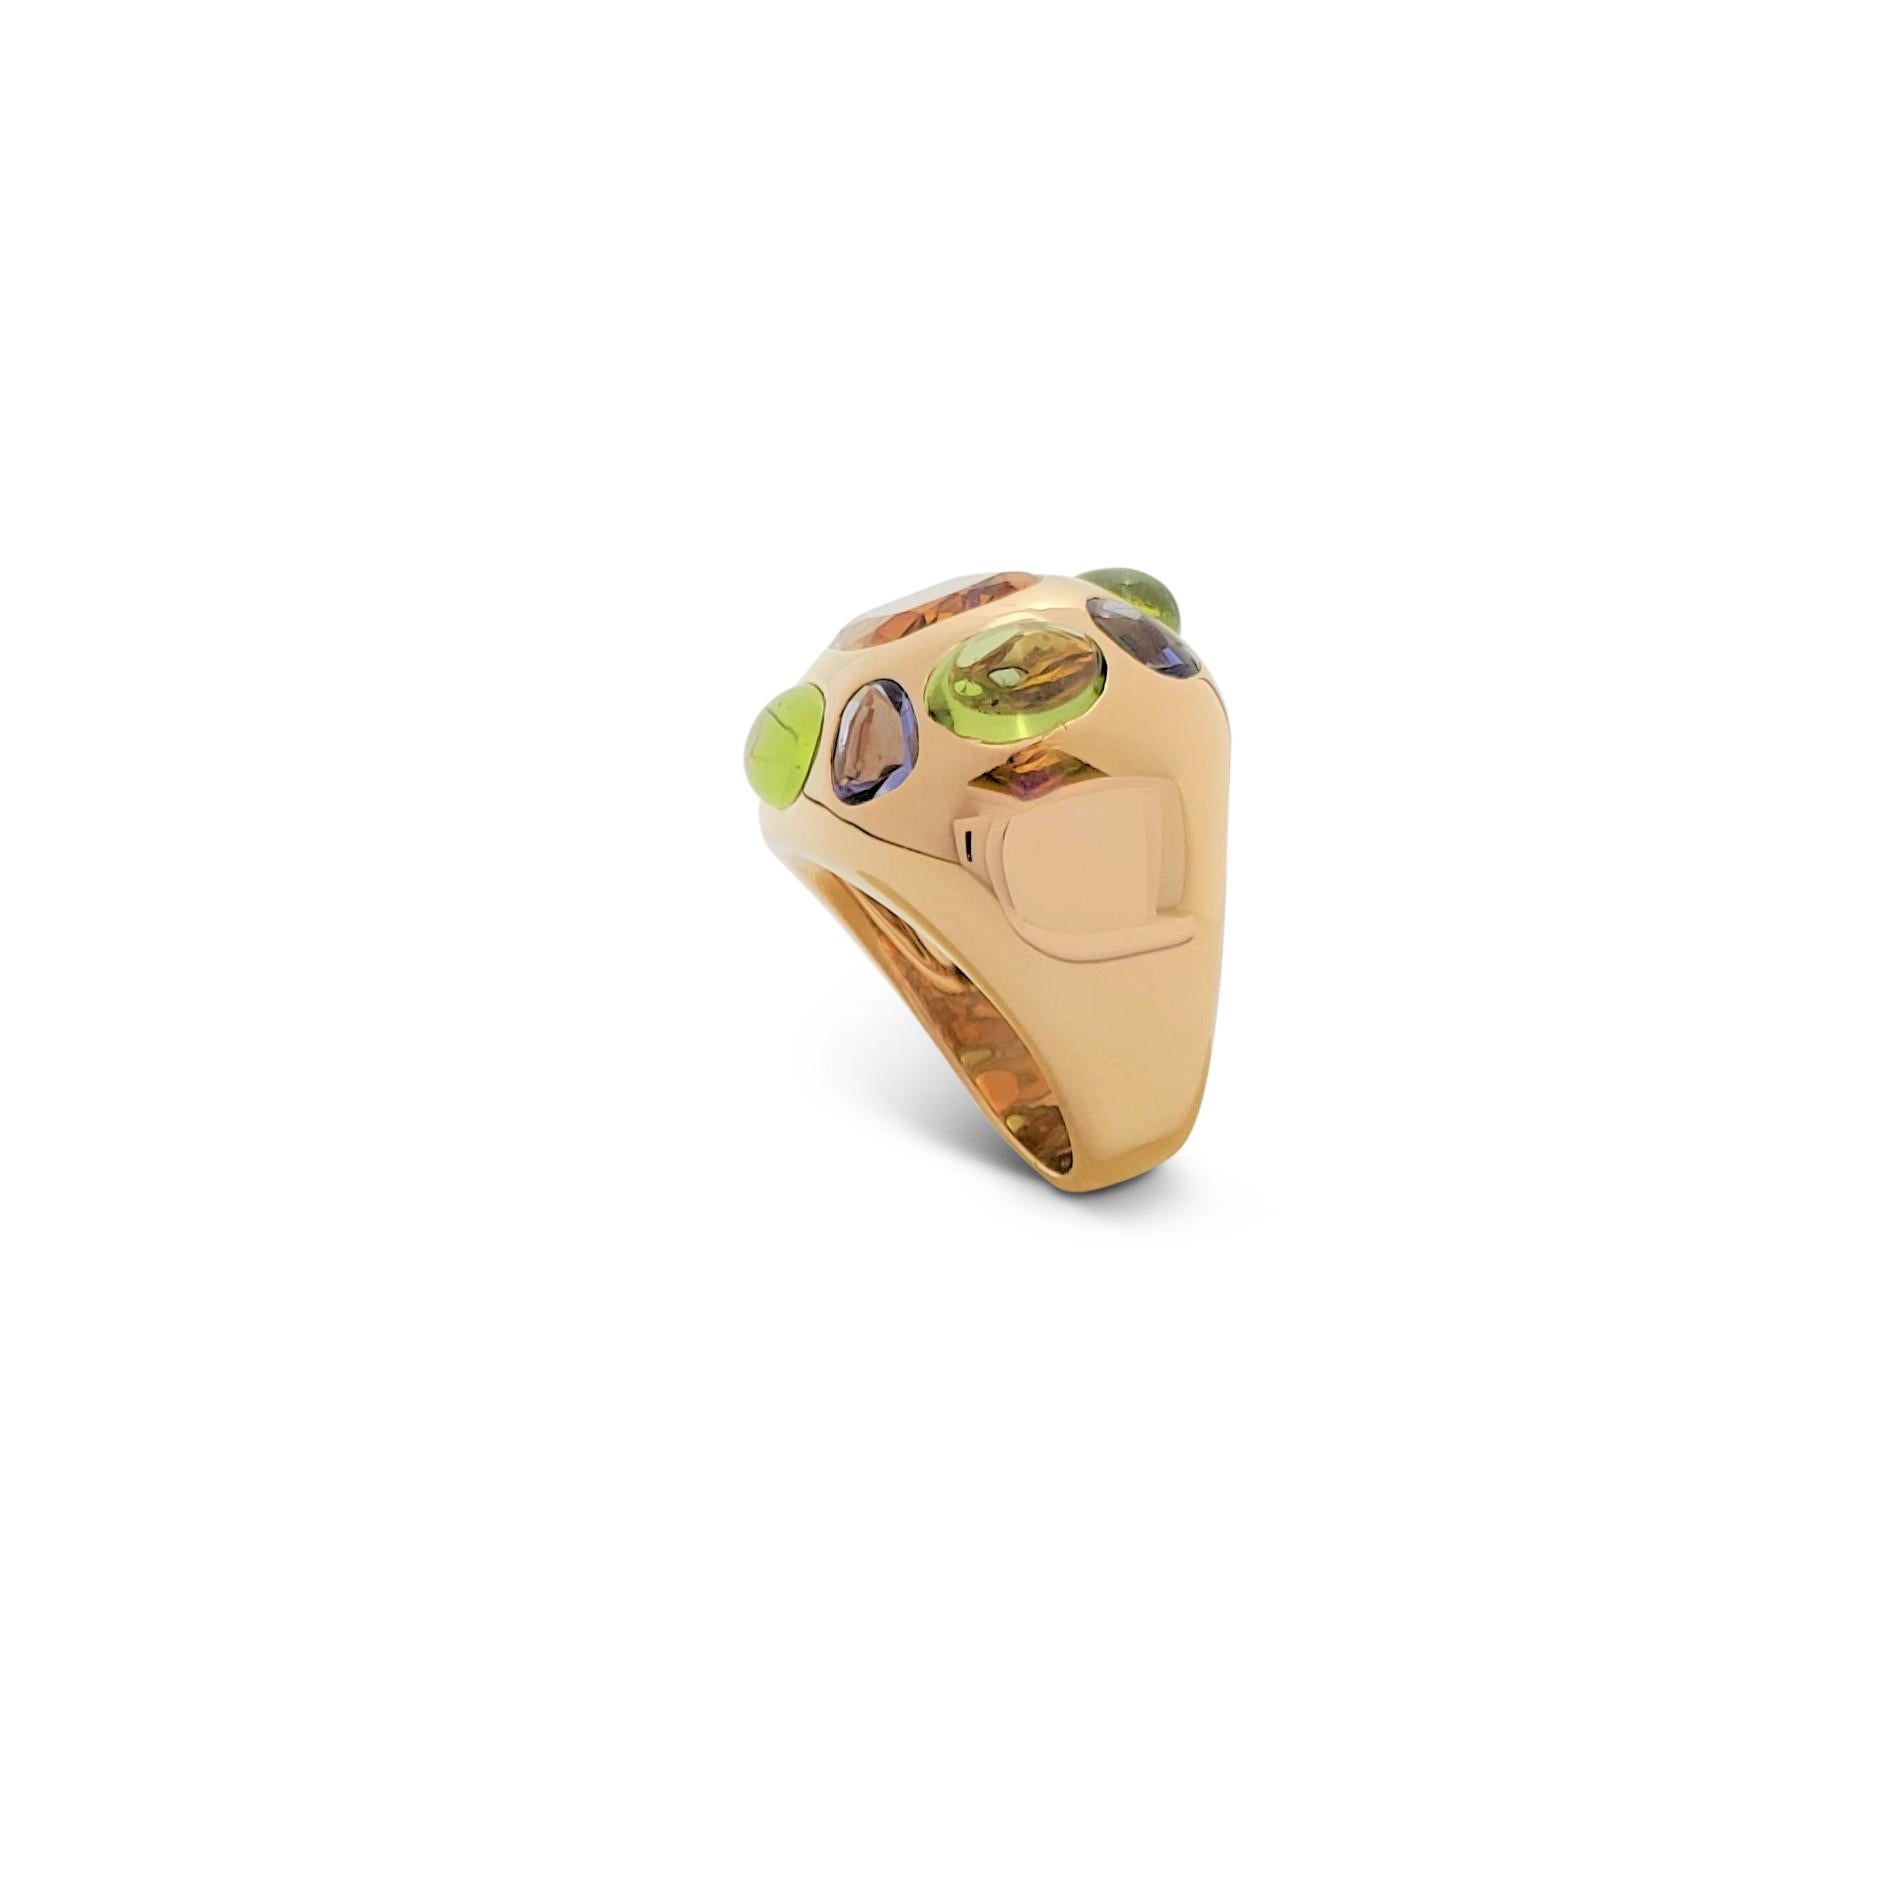 Authentic vibrant Chanel cocktail ring from the 'Coco' collection crafted in 18 karat yellow gold features a faceted citrine in the center weighing an estimated 7 carats which is surrounded by alternating cabochon peridots and oval tanzanites